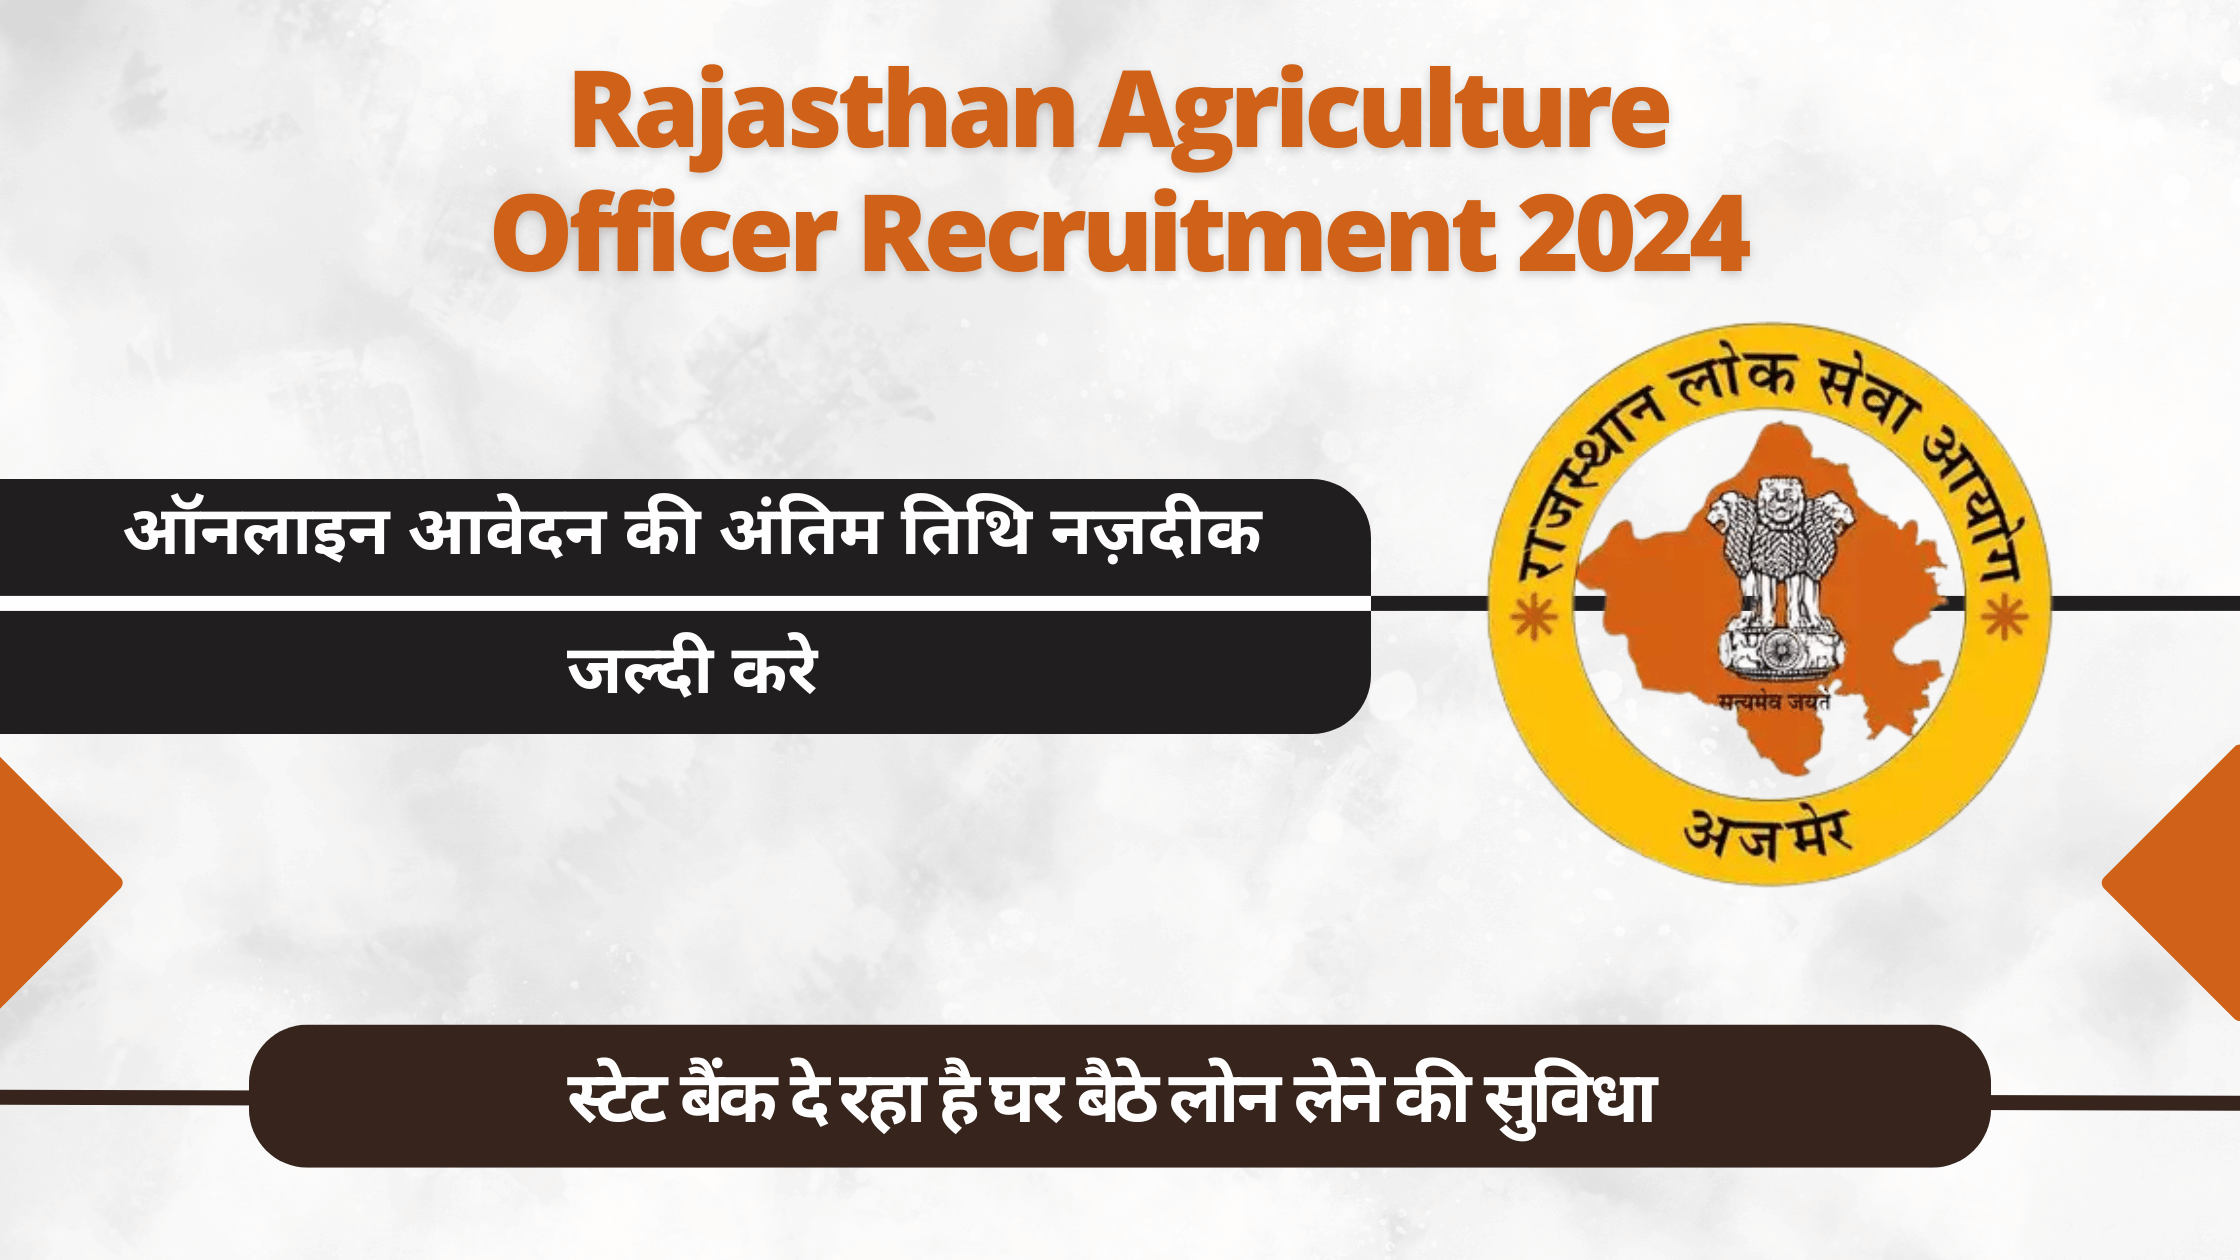 Rajasthan Agriculture Officer Recruitment 2024